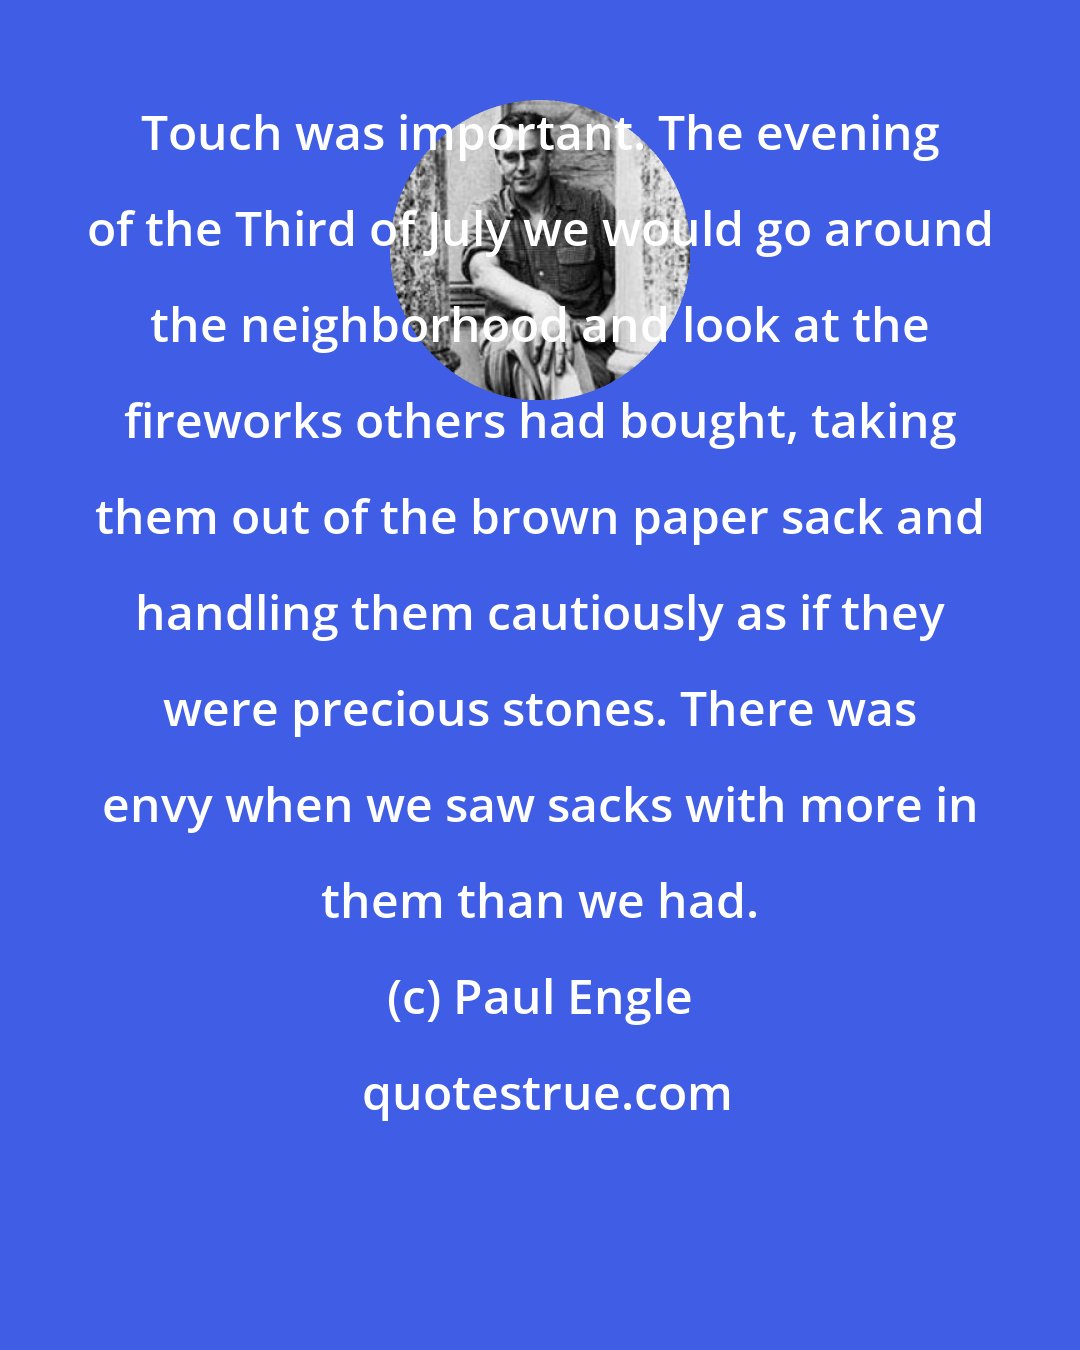 Paul Engle: Touch was important. The evening of the Third of July we would go around the neighborhood and look at the fireworks others had bought, taking them out of the brown paper sack and handling them cautiously as if they were precious stones. There was envy when we saw sacks with more in them than we had.